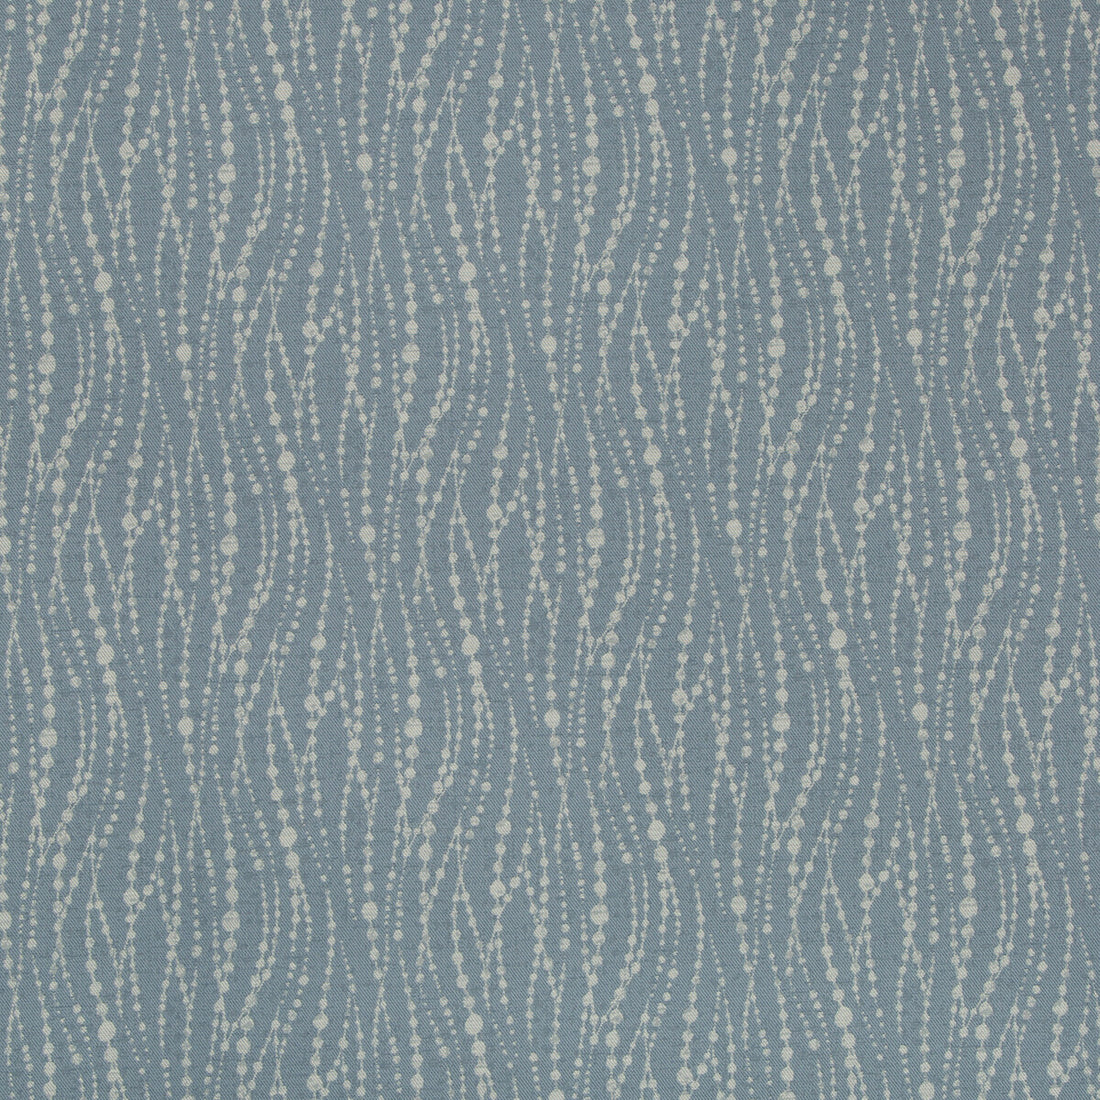 Shadowplay fabric in satellite color - pattern 35093.5.0 - by Kravet Contract in the Gis Crypton collection